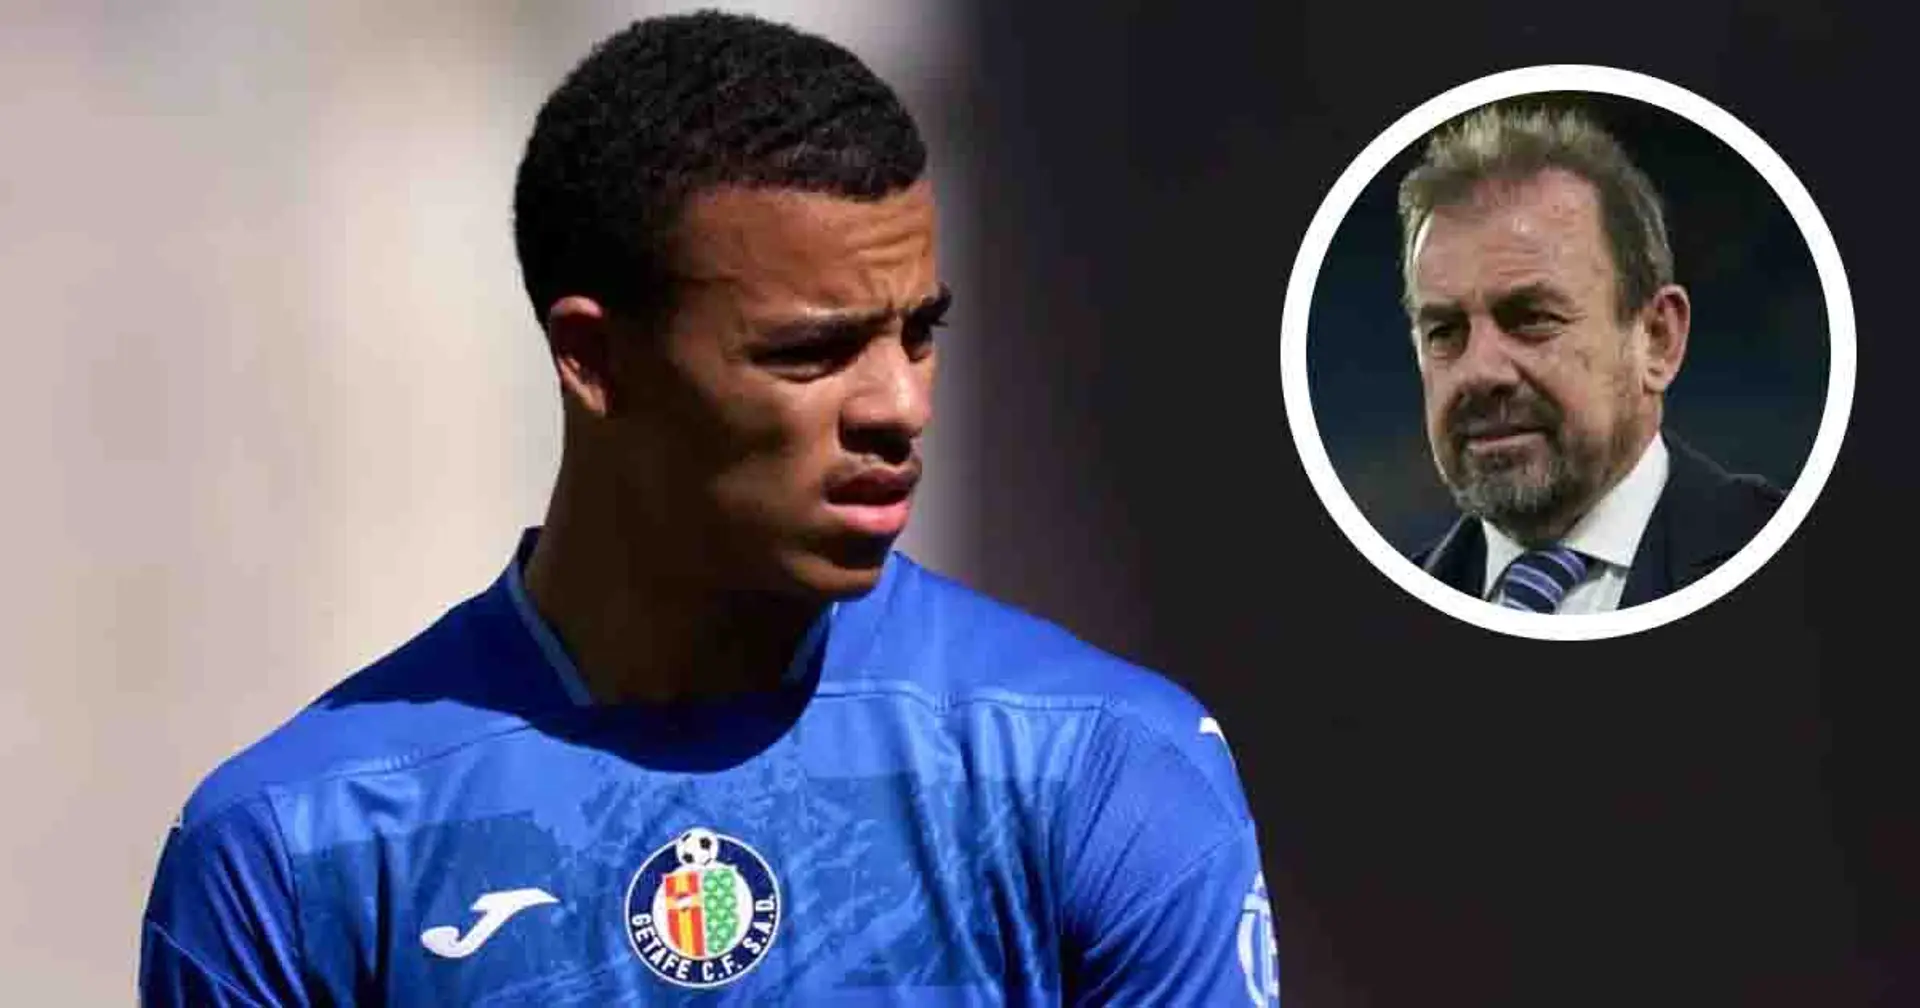 ‘He won’t return to Man United’: Getafe president confirms one club to have made approach for Greenwood